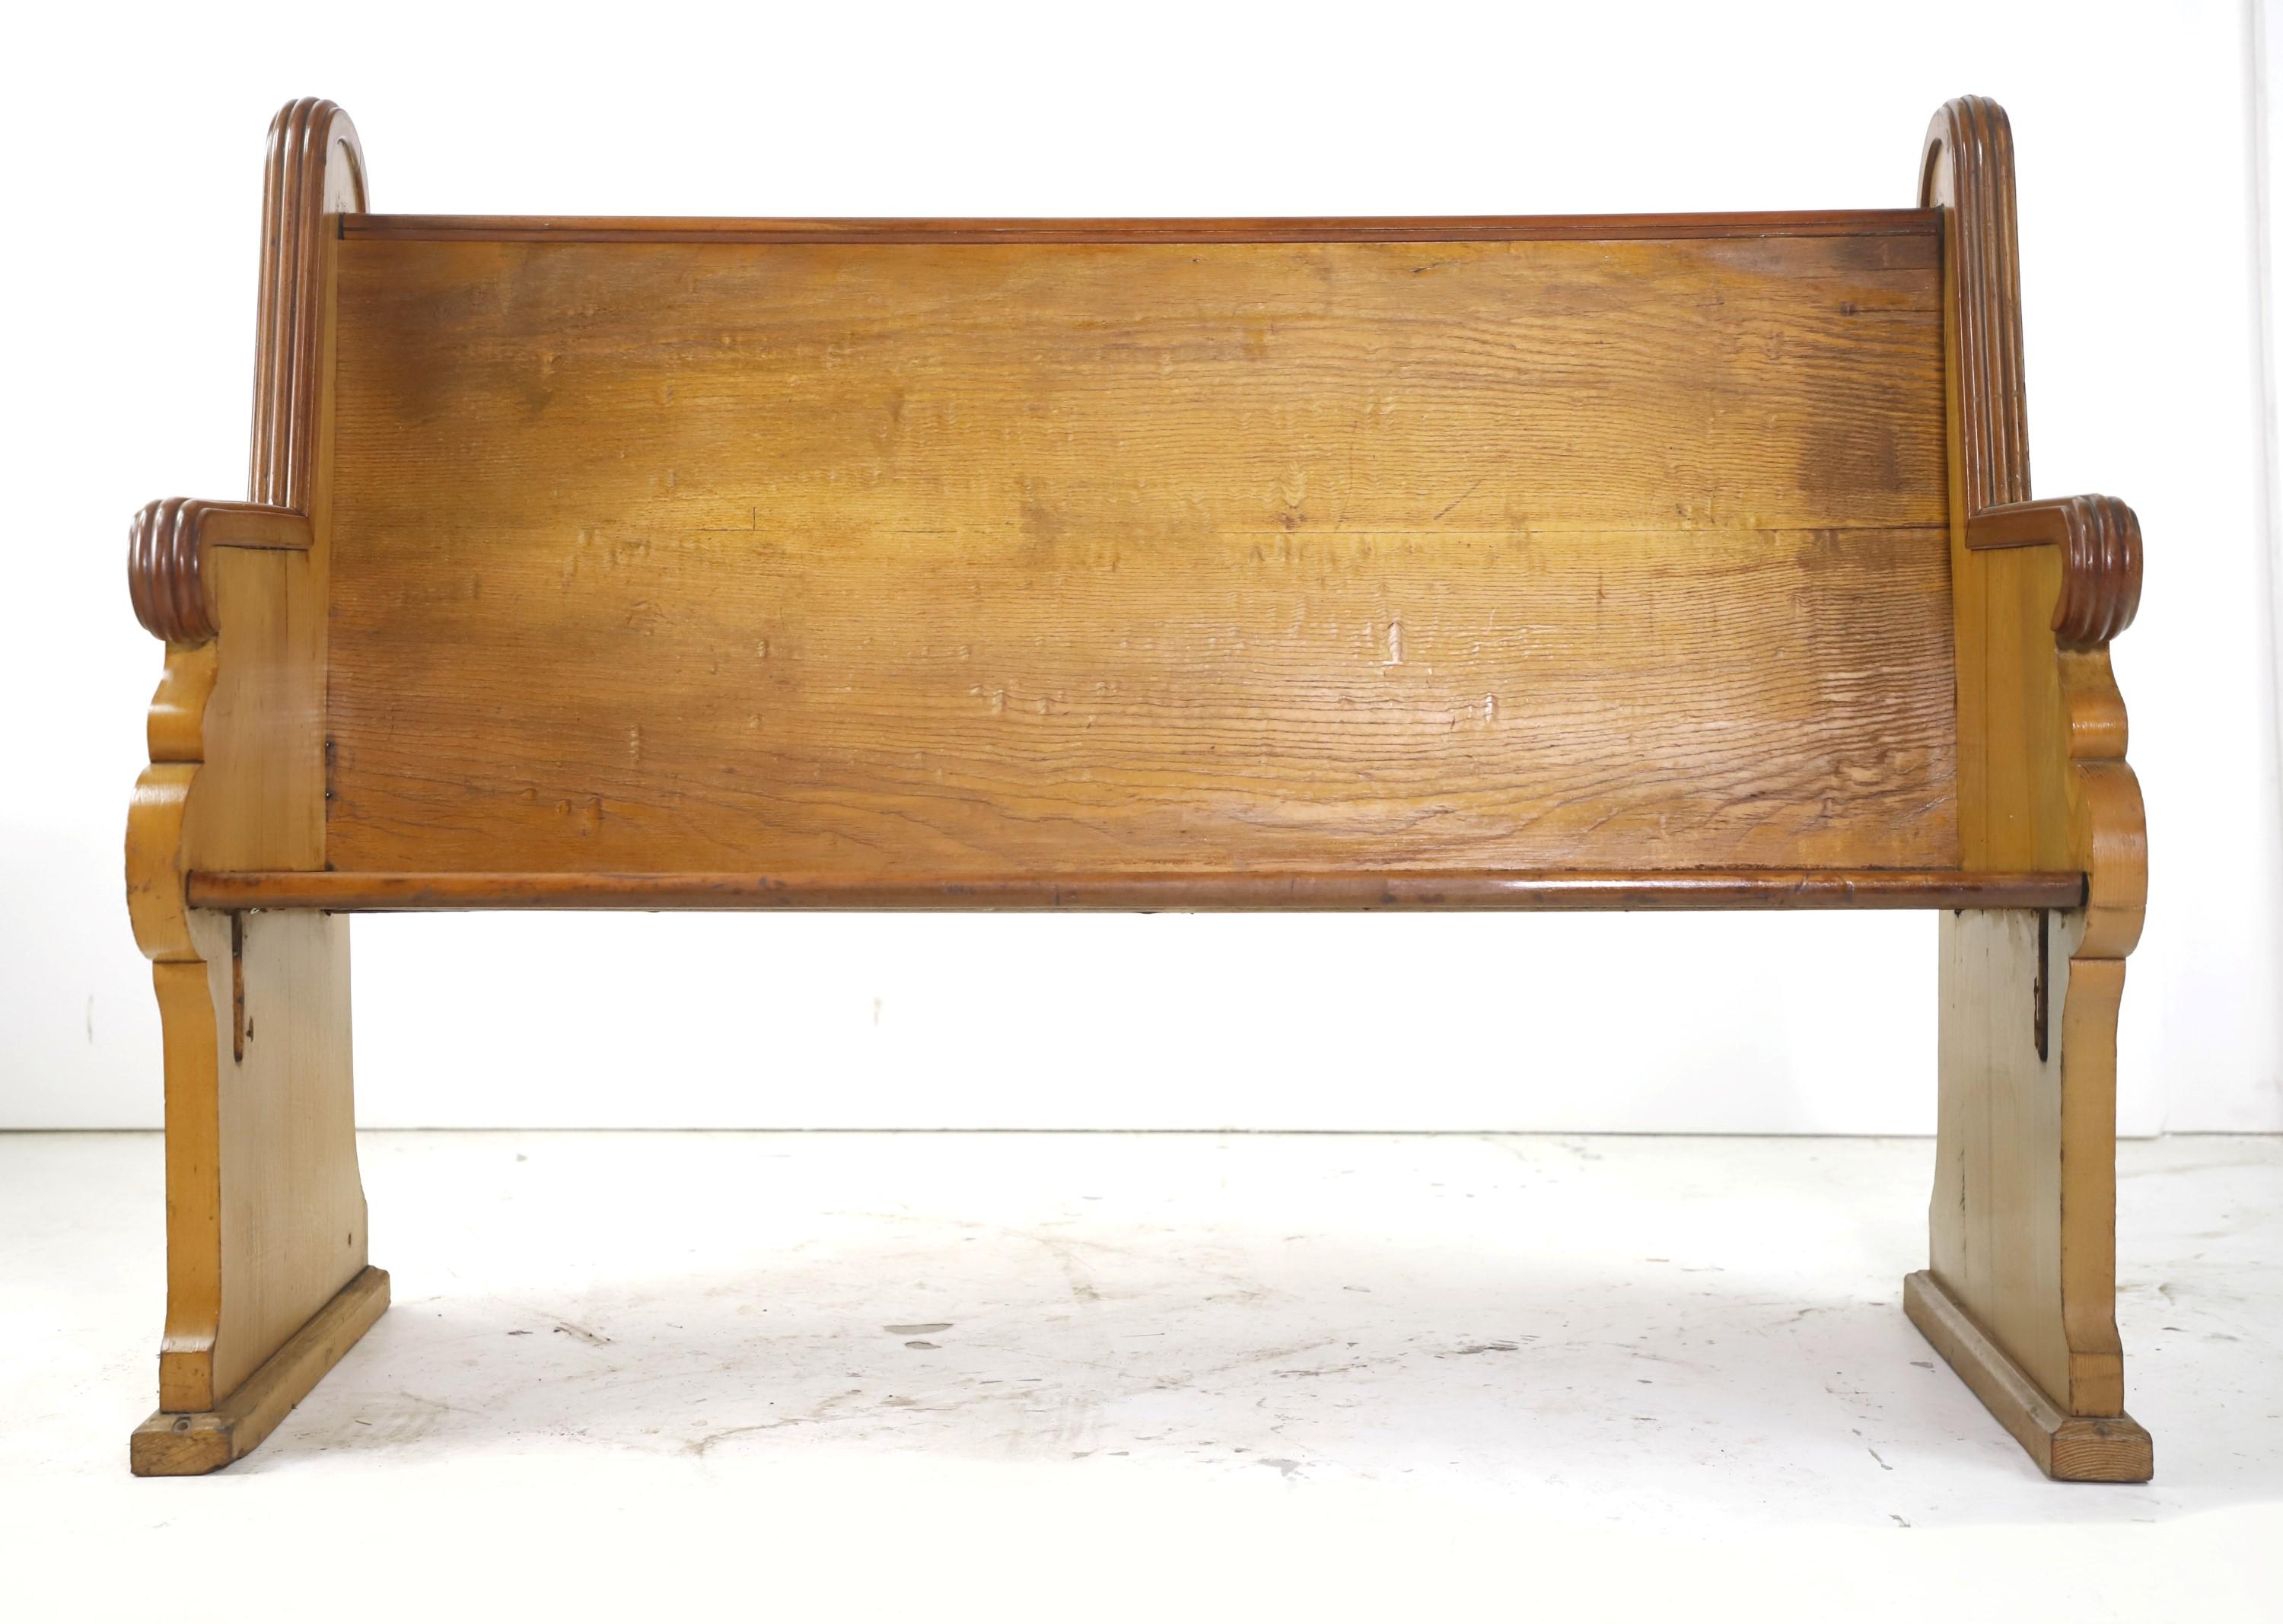 Late 1800s church pew made from solid oak. Finished in a light stain. This features a hand carved Gothic design with Bullseyes on the corners. Please note, this item is located in one of our NYC locations.